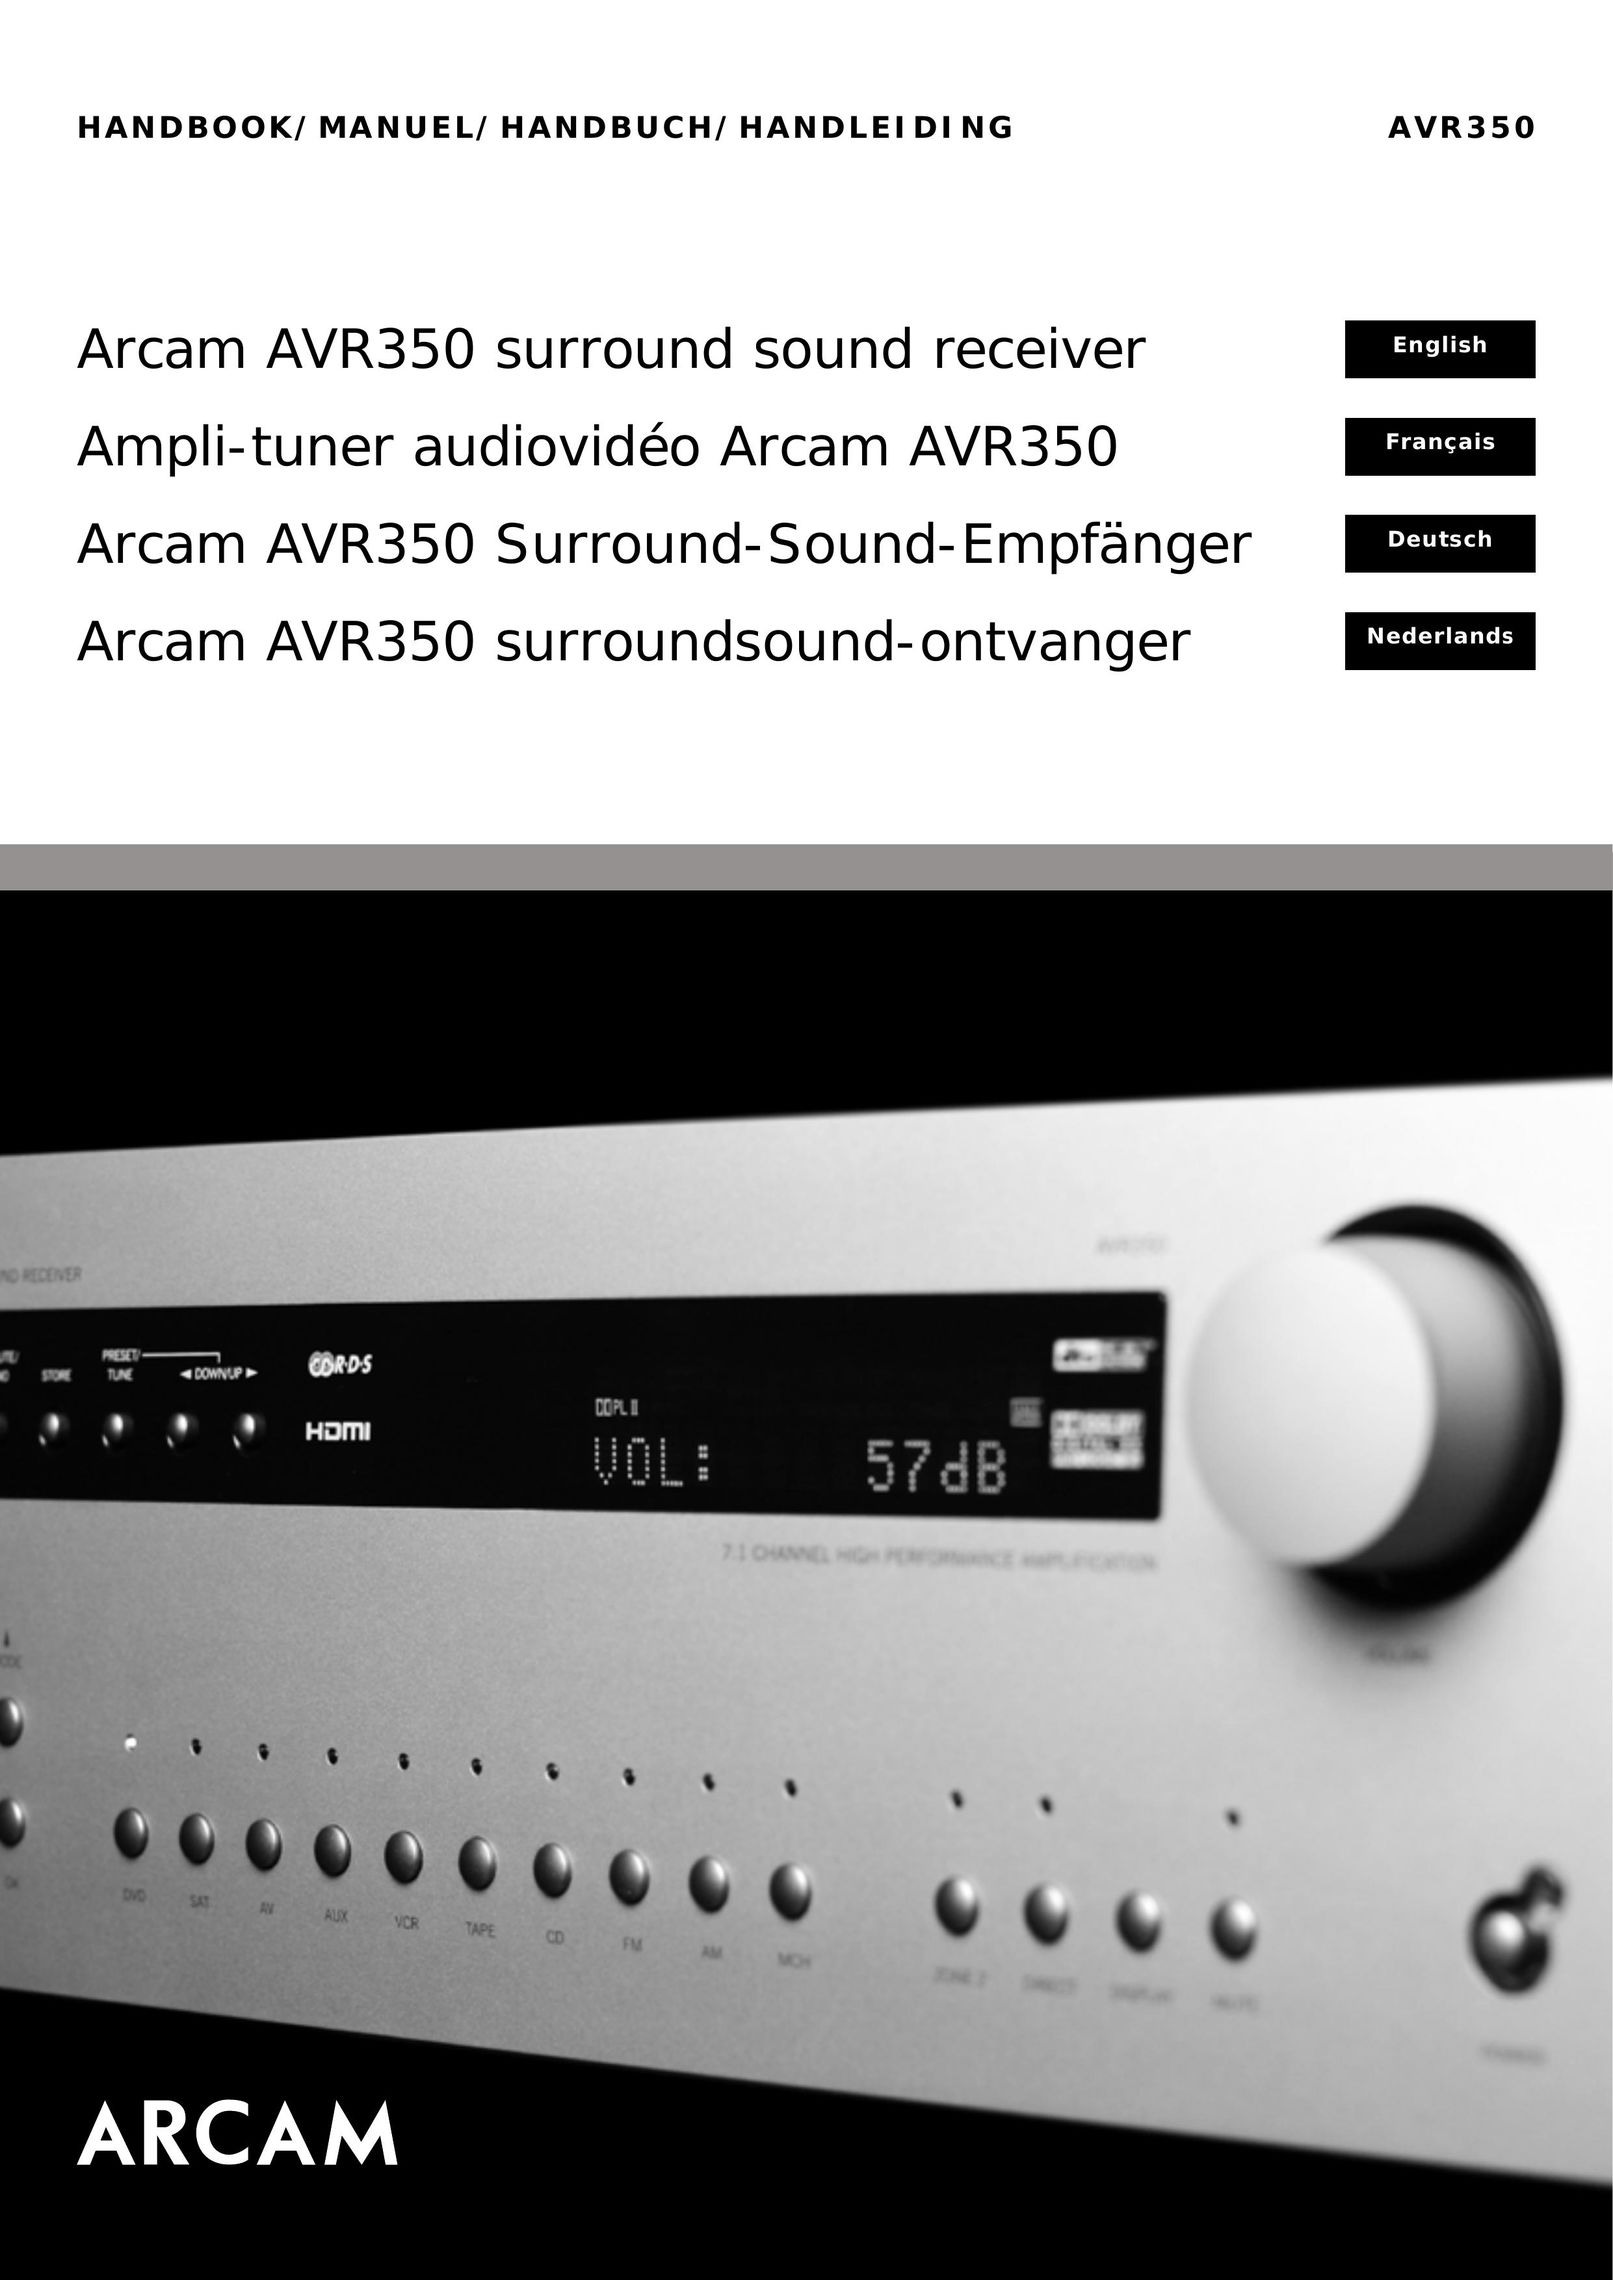 Arcam AVR350 Home Theater System User Manual